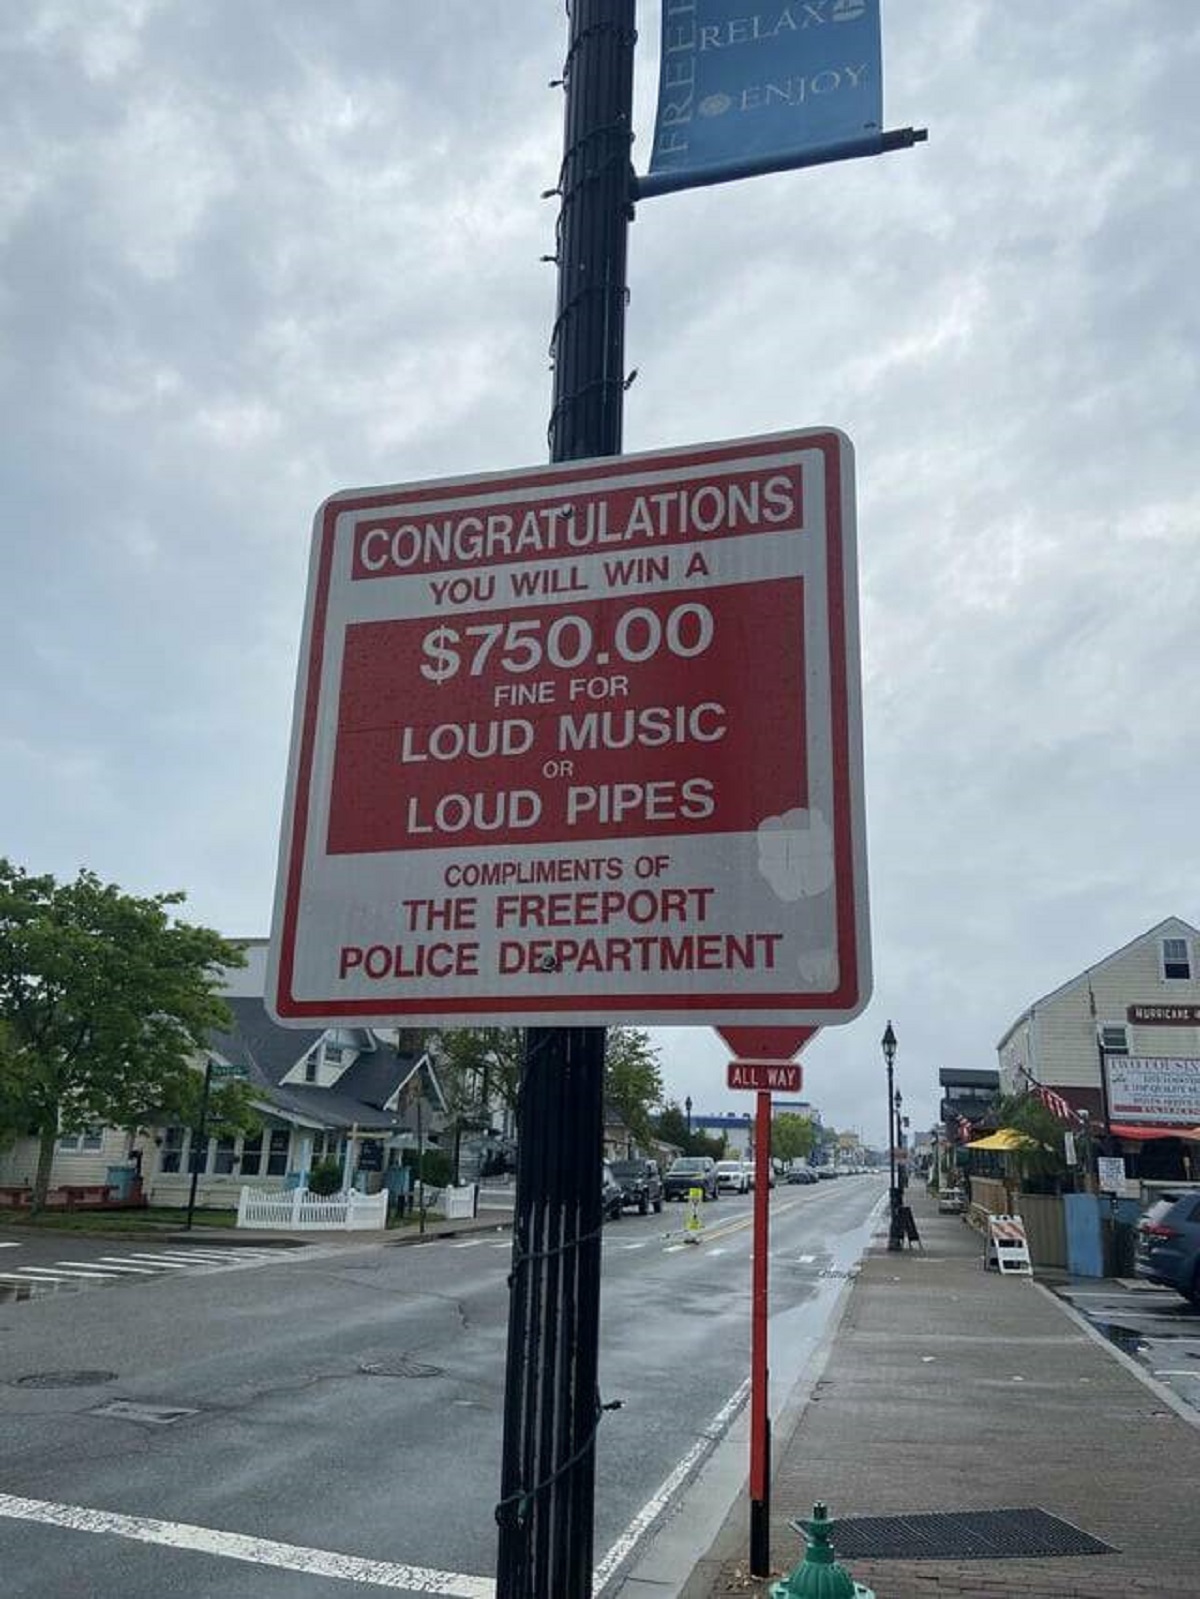 "A mildly passive aggressive warning sign by the local police department."